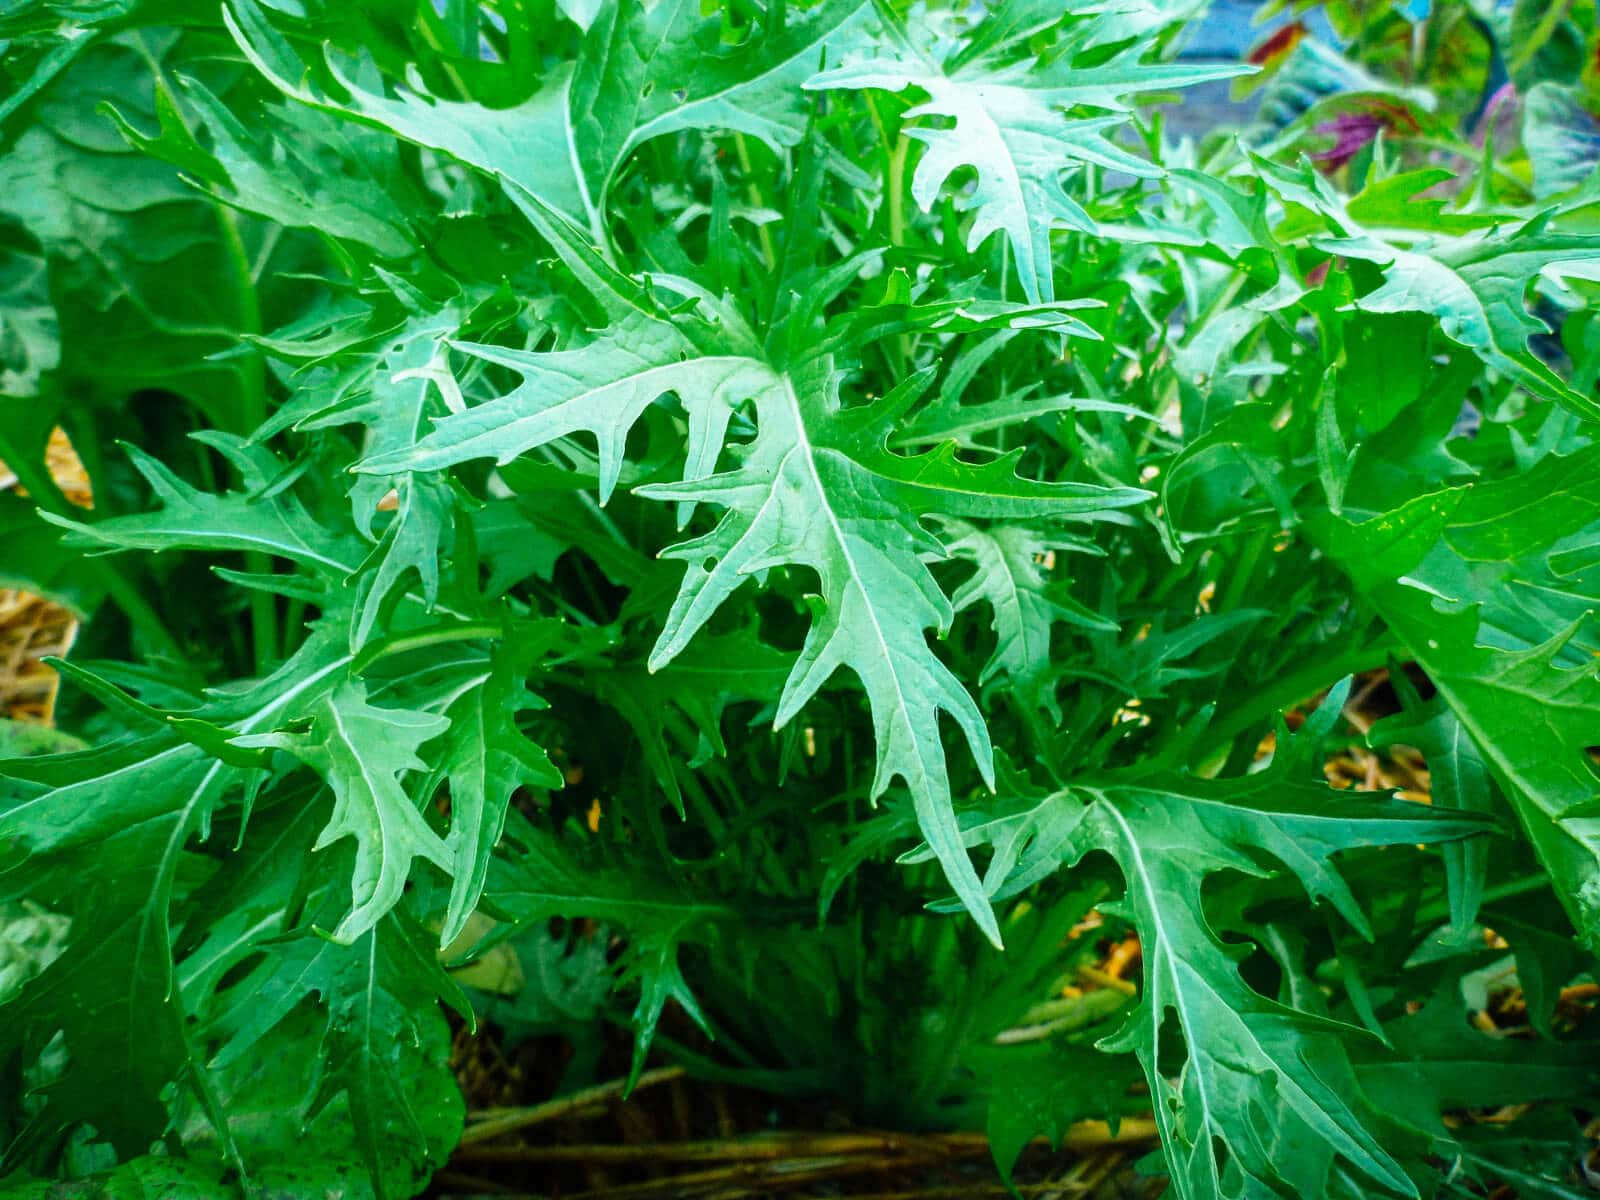 Mitstuba is one of the Asian mustard greens that grow in partial shade